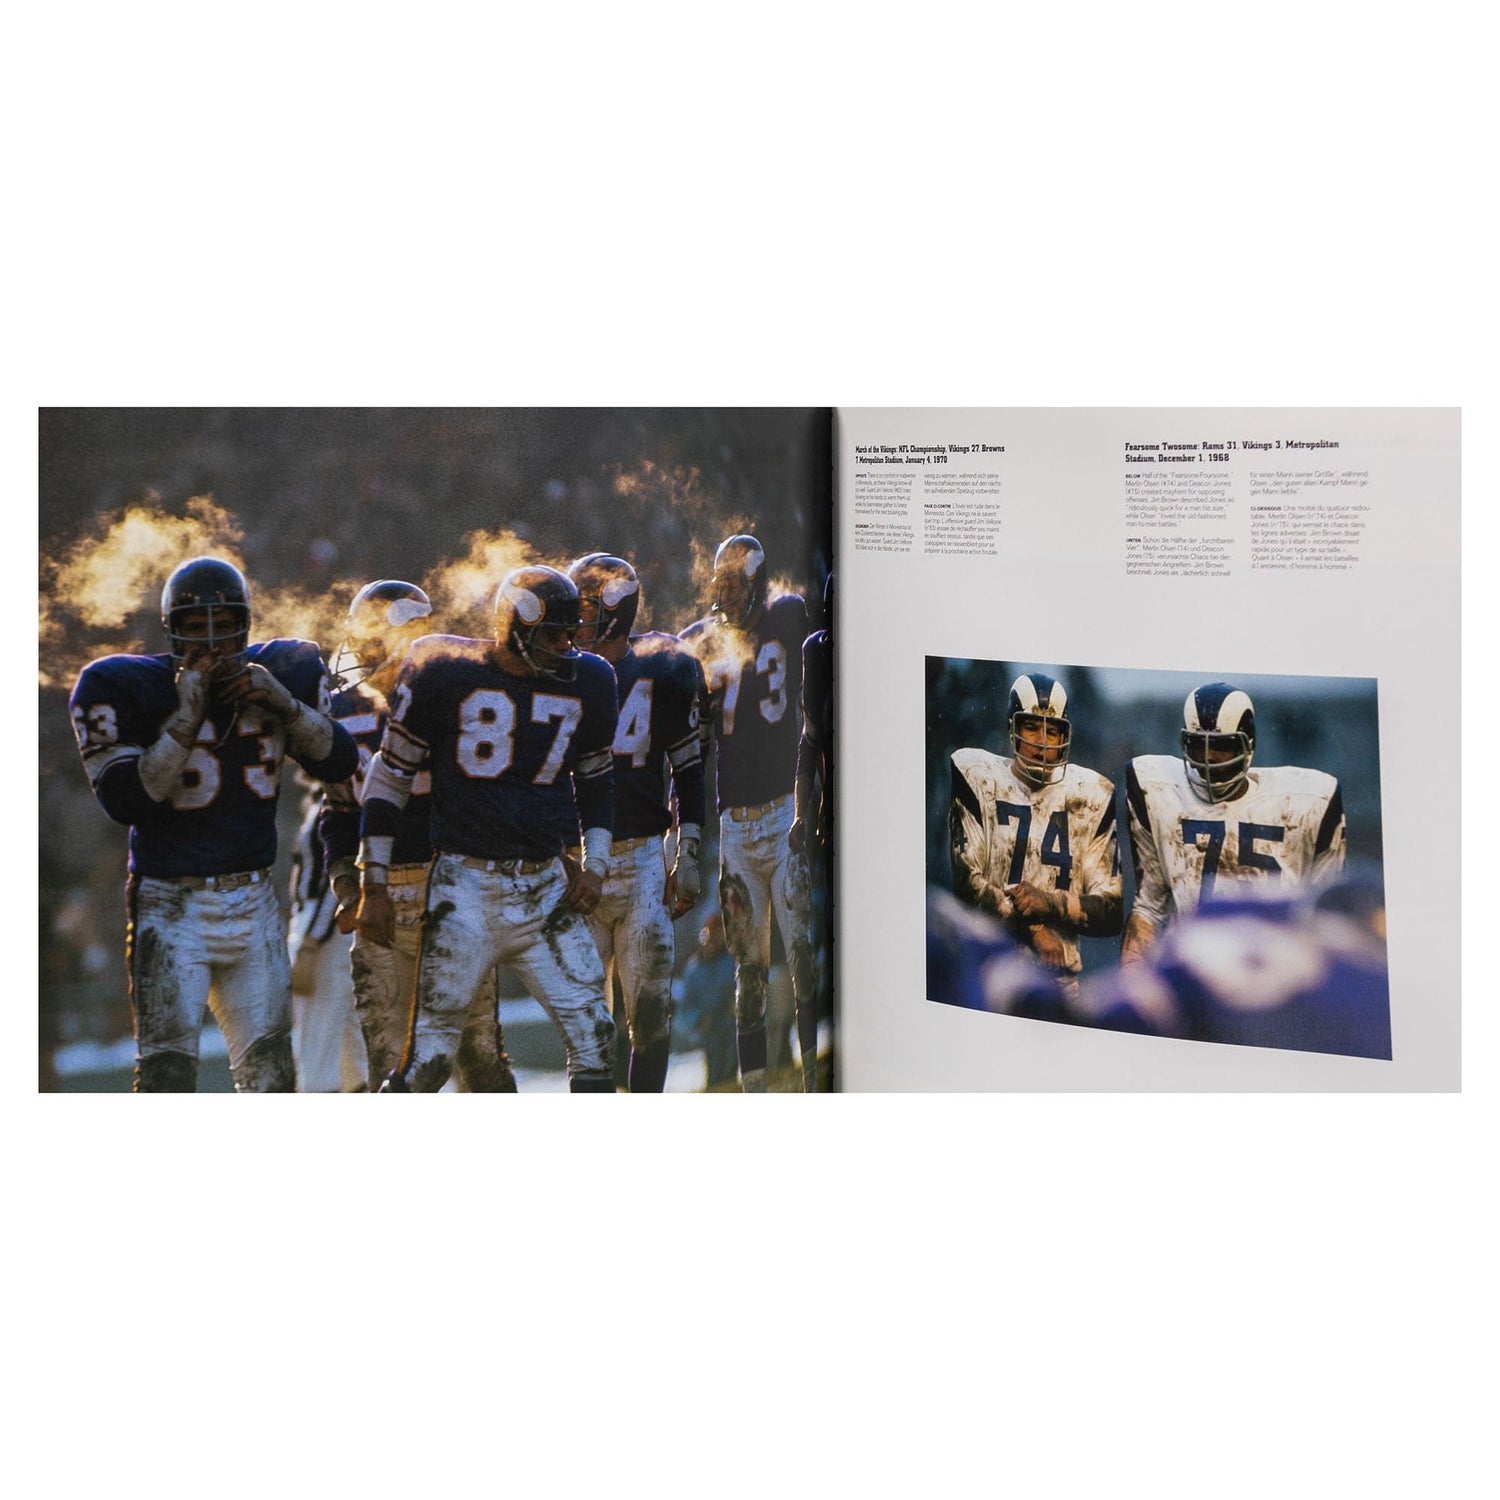 Neil Leifer: Guts & Glory “The Golden Age of American Football 1958-1978 ZOOM